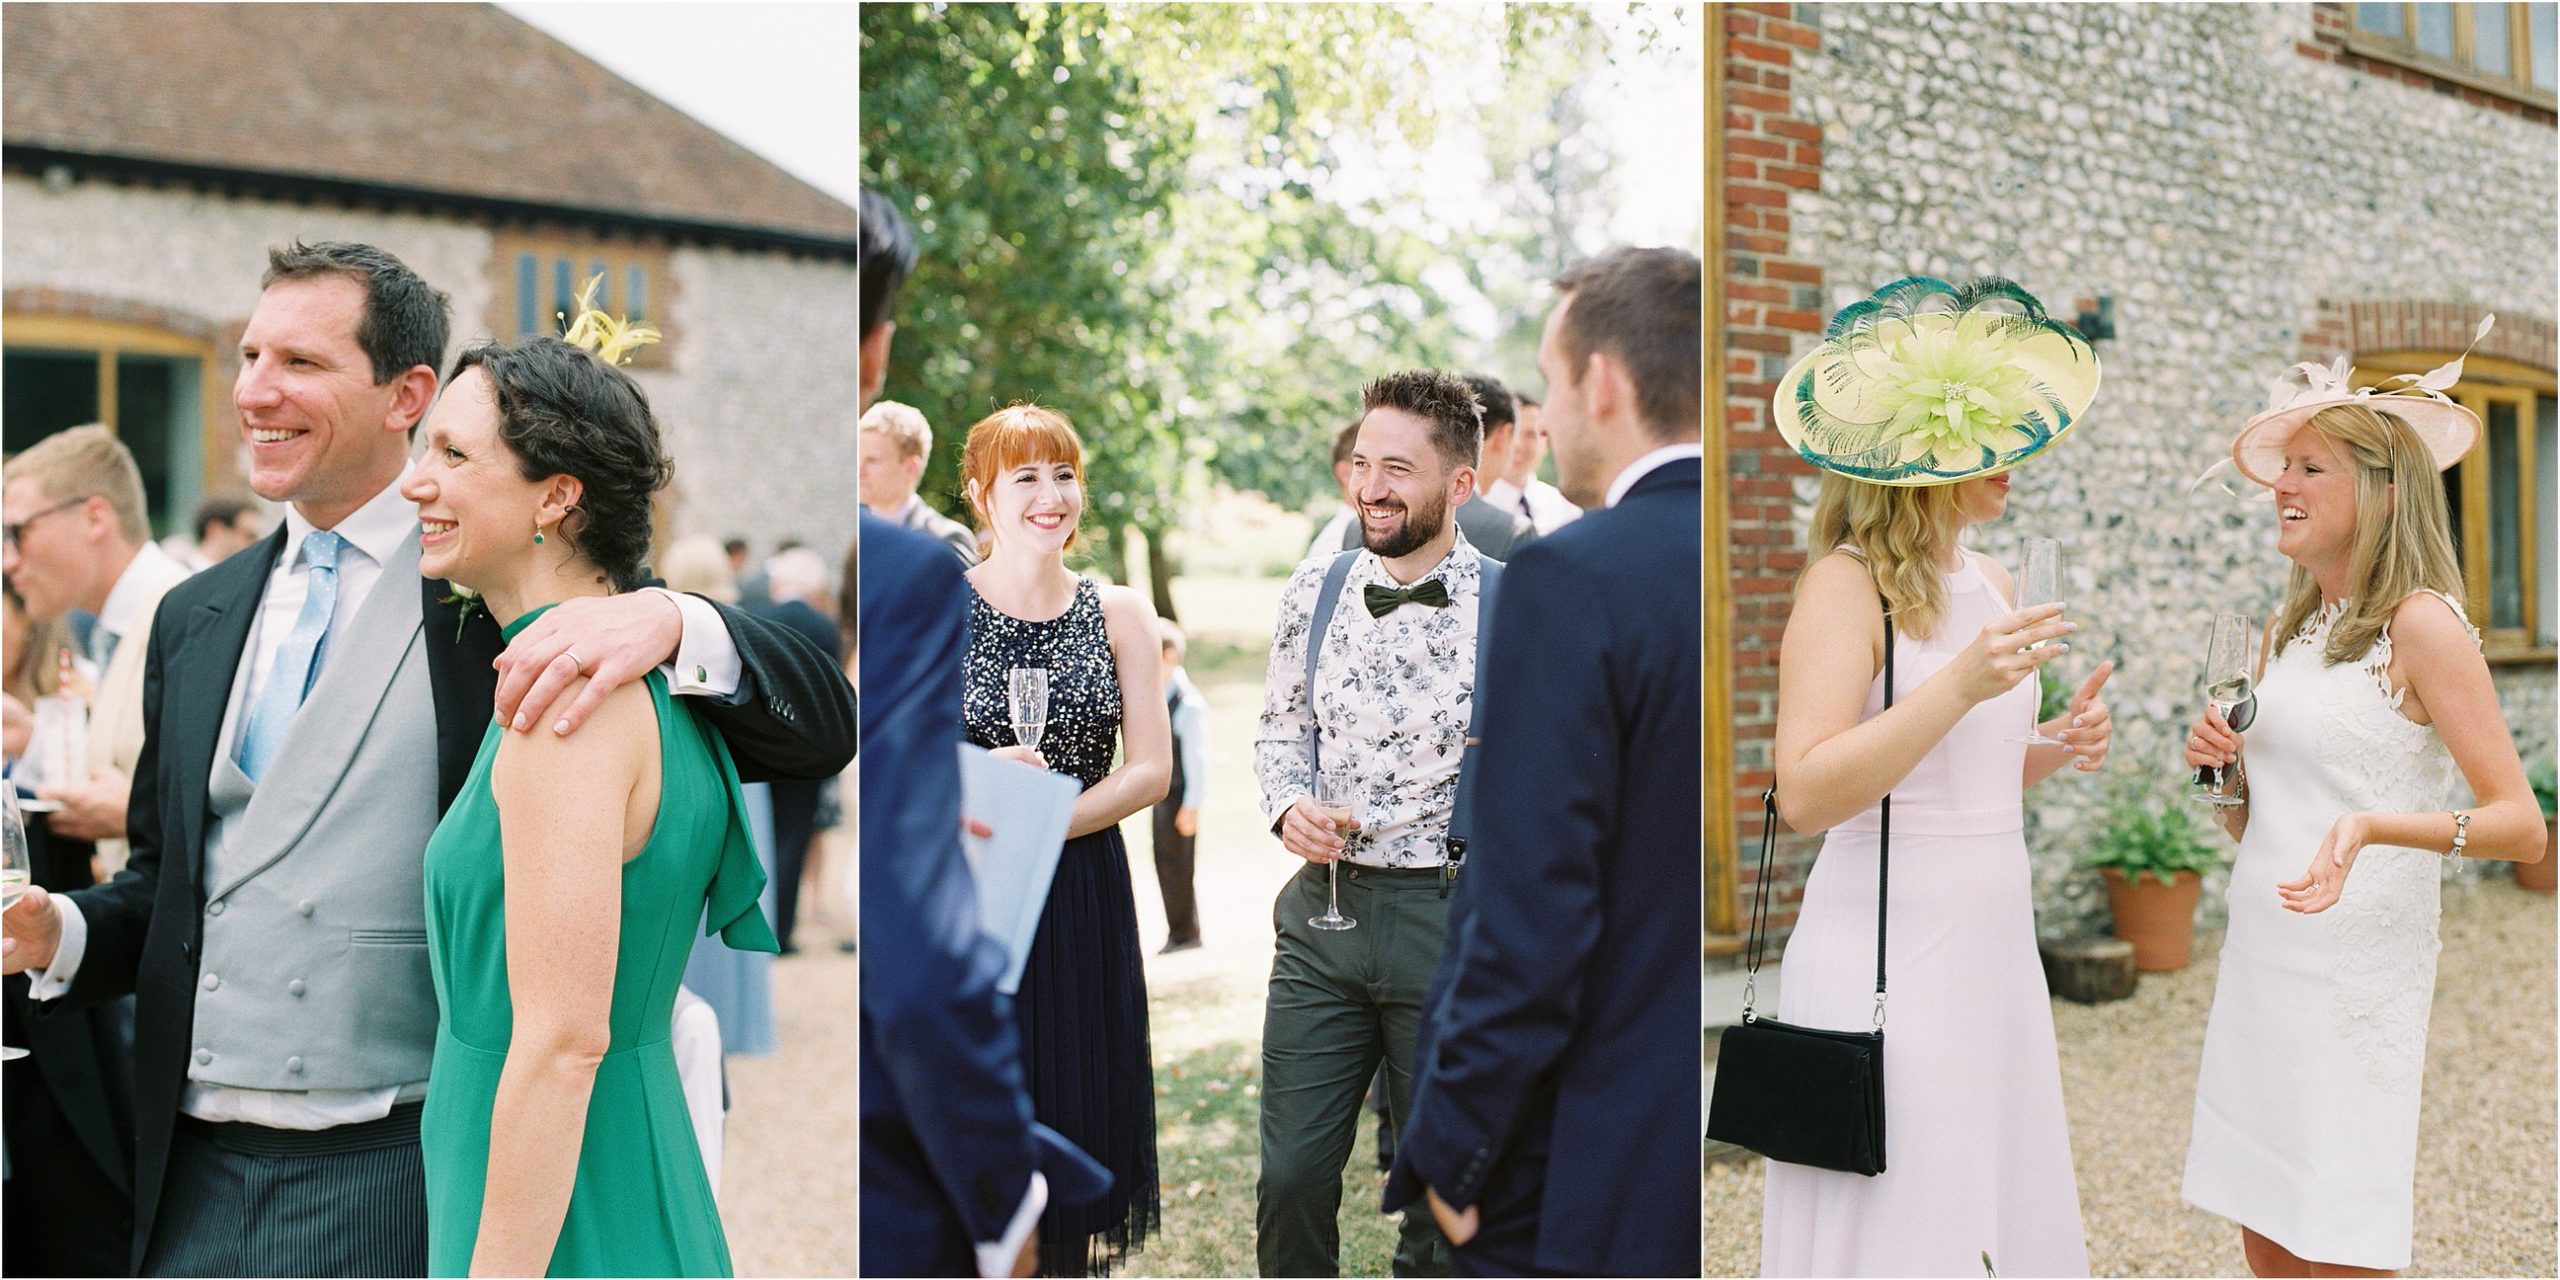 relaxed wedding photographer captures guests hugging